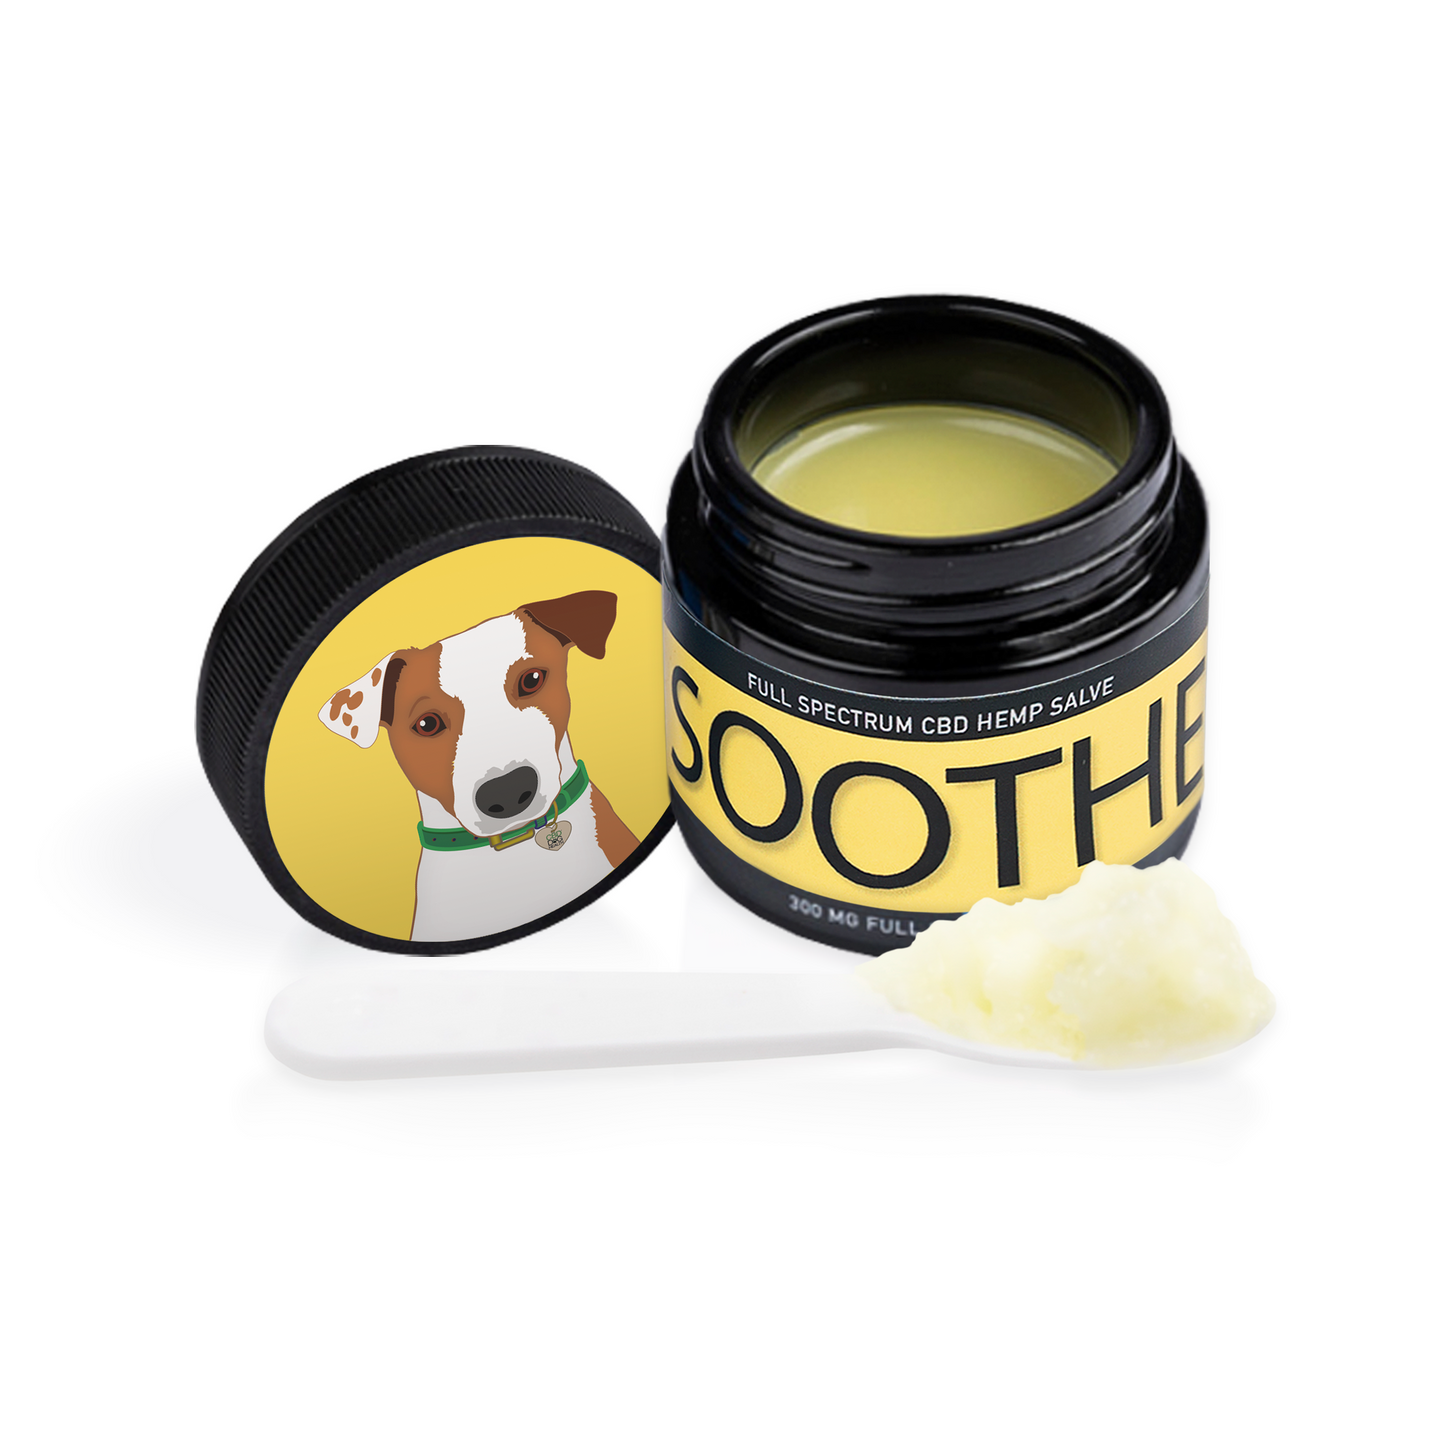 SOOTHE: HOT SPOTS, BUG BITES, AND ALLERGIES FOR CATS & DOGS (300mg & 600mg)